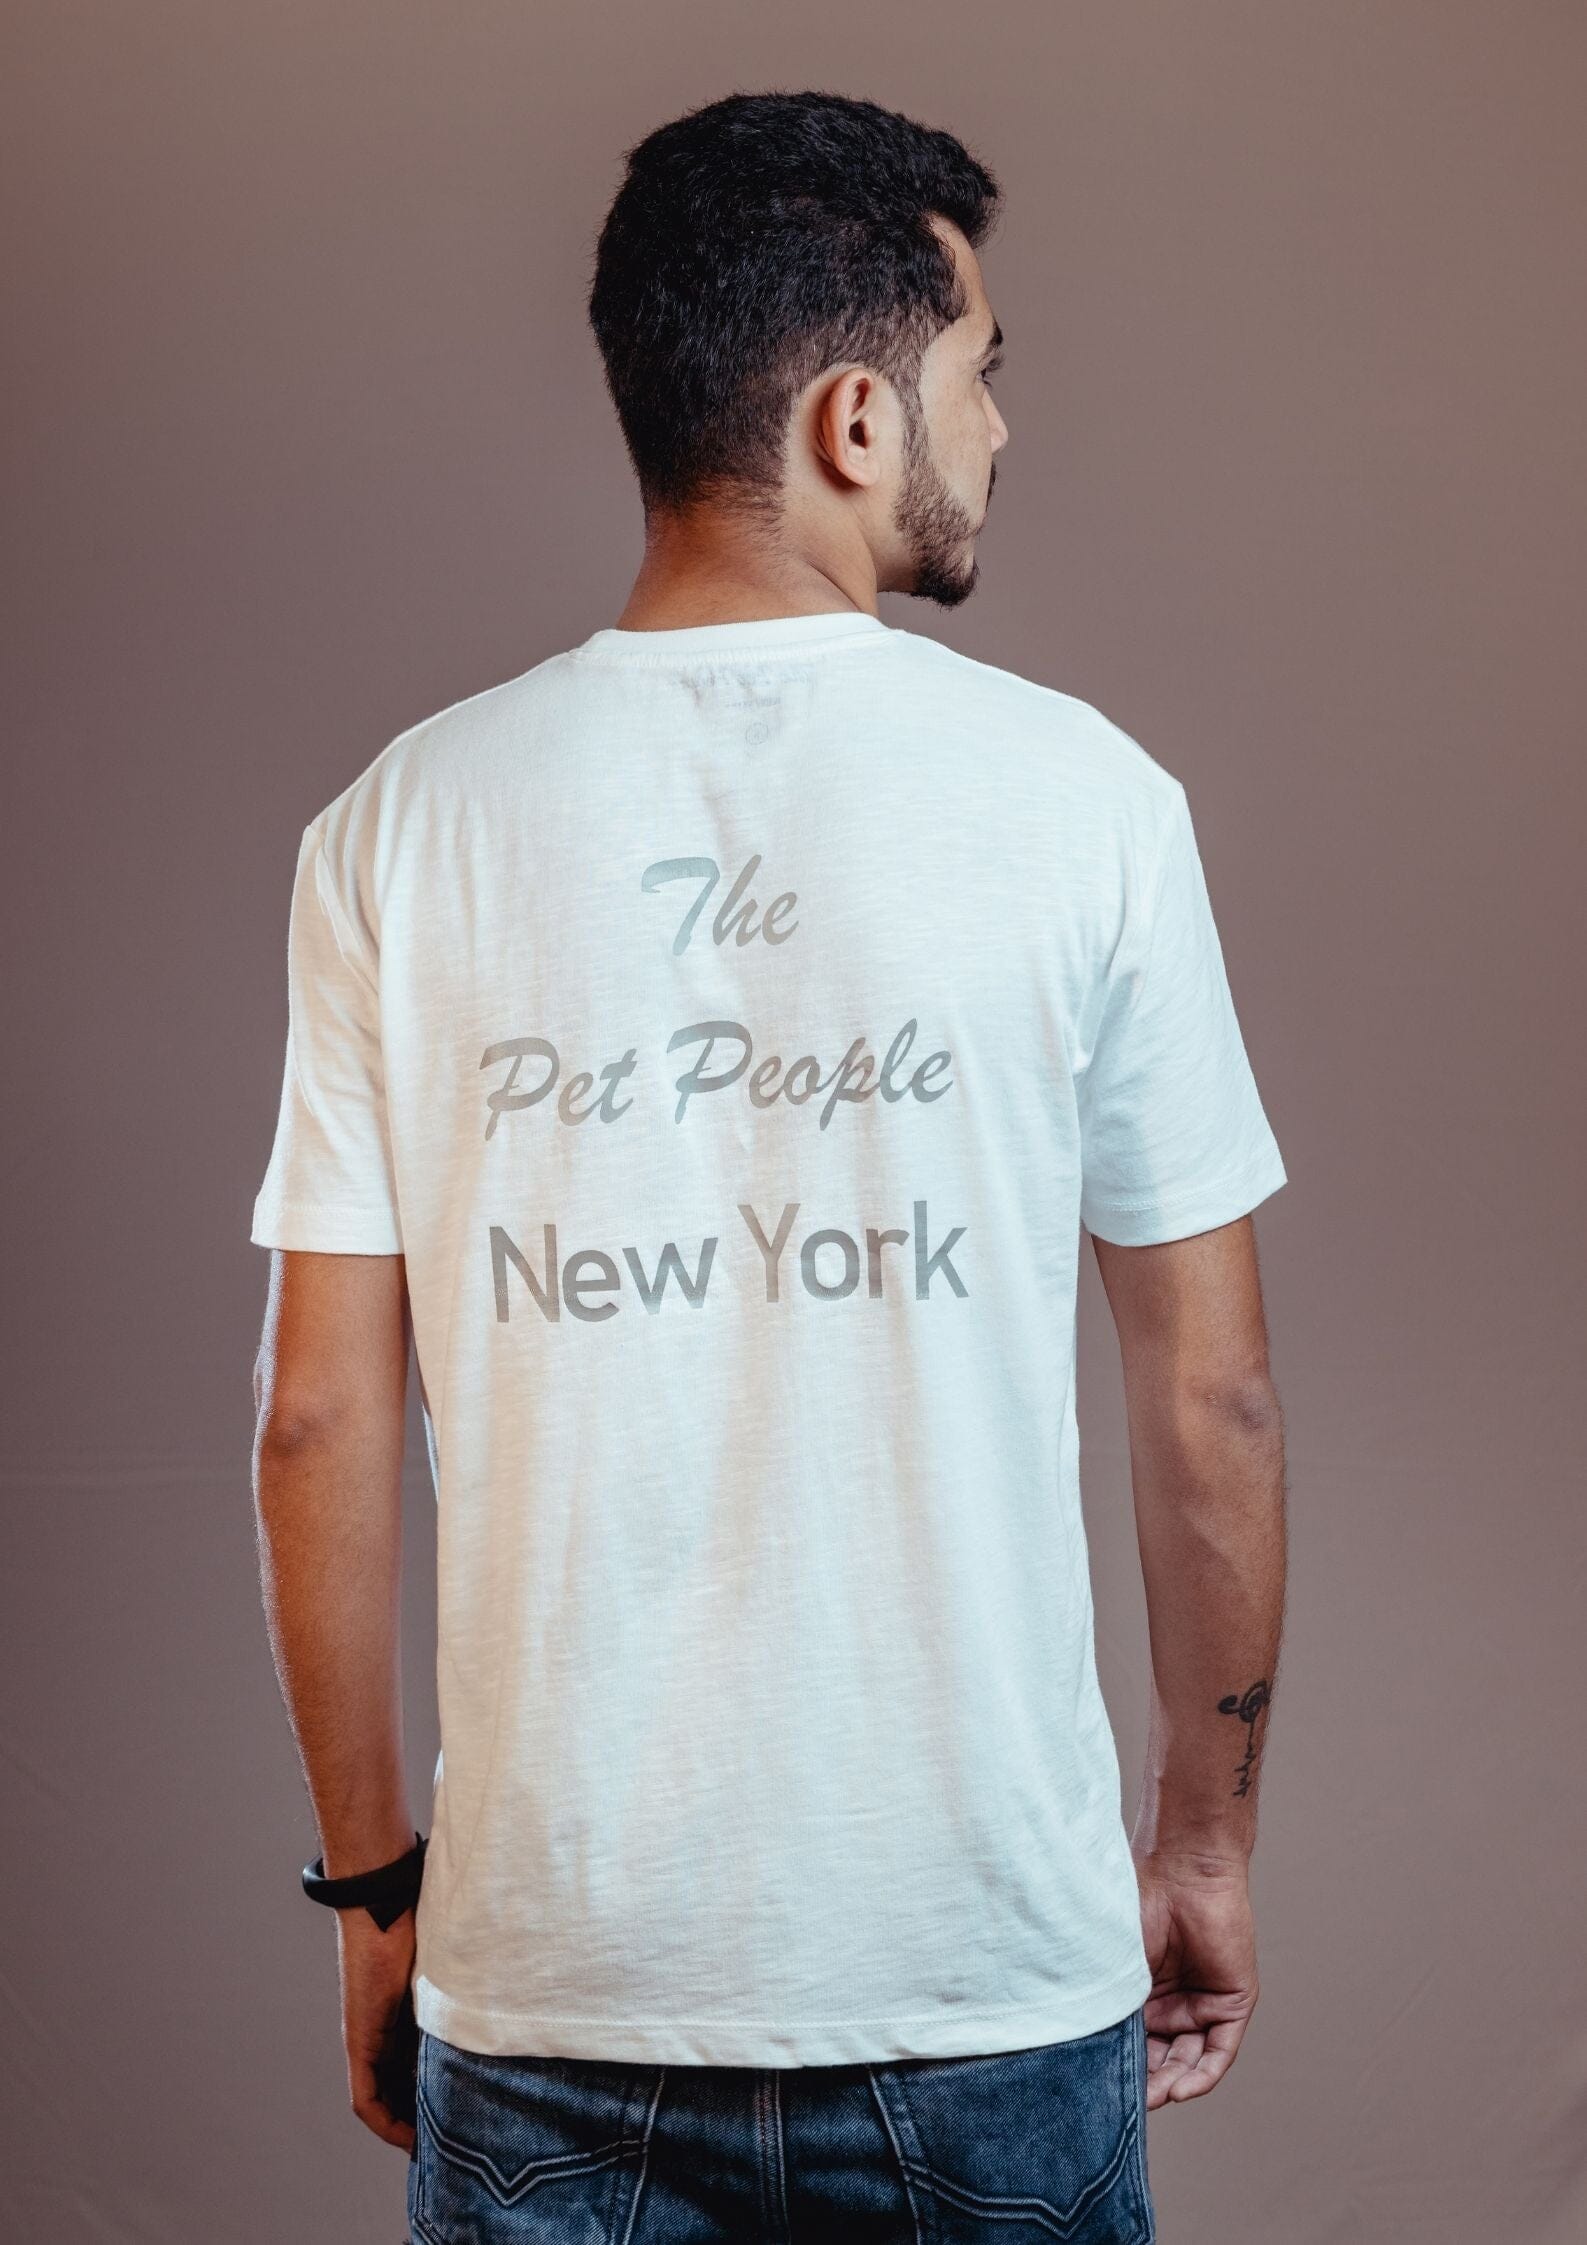 BEST FRIEND T-Shirt Shirts & Tops ThePetPeopleCafe 